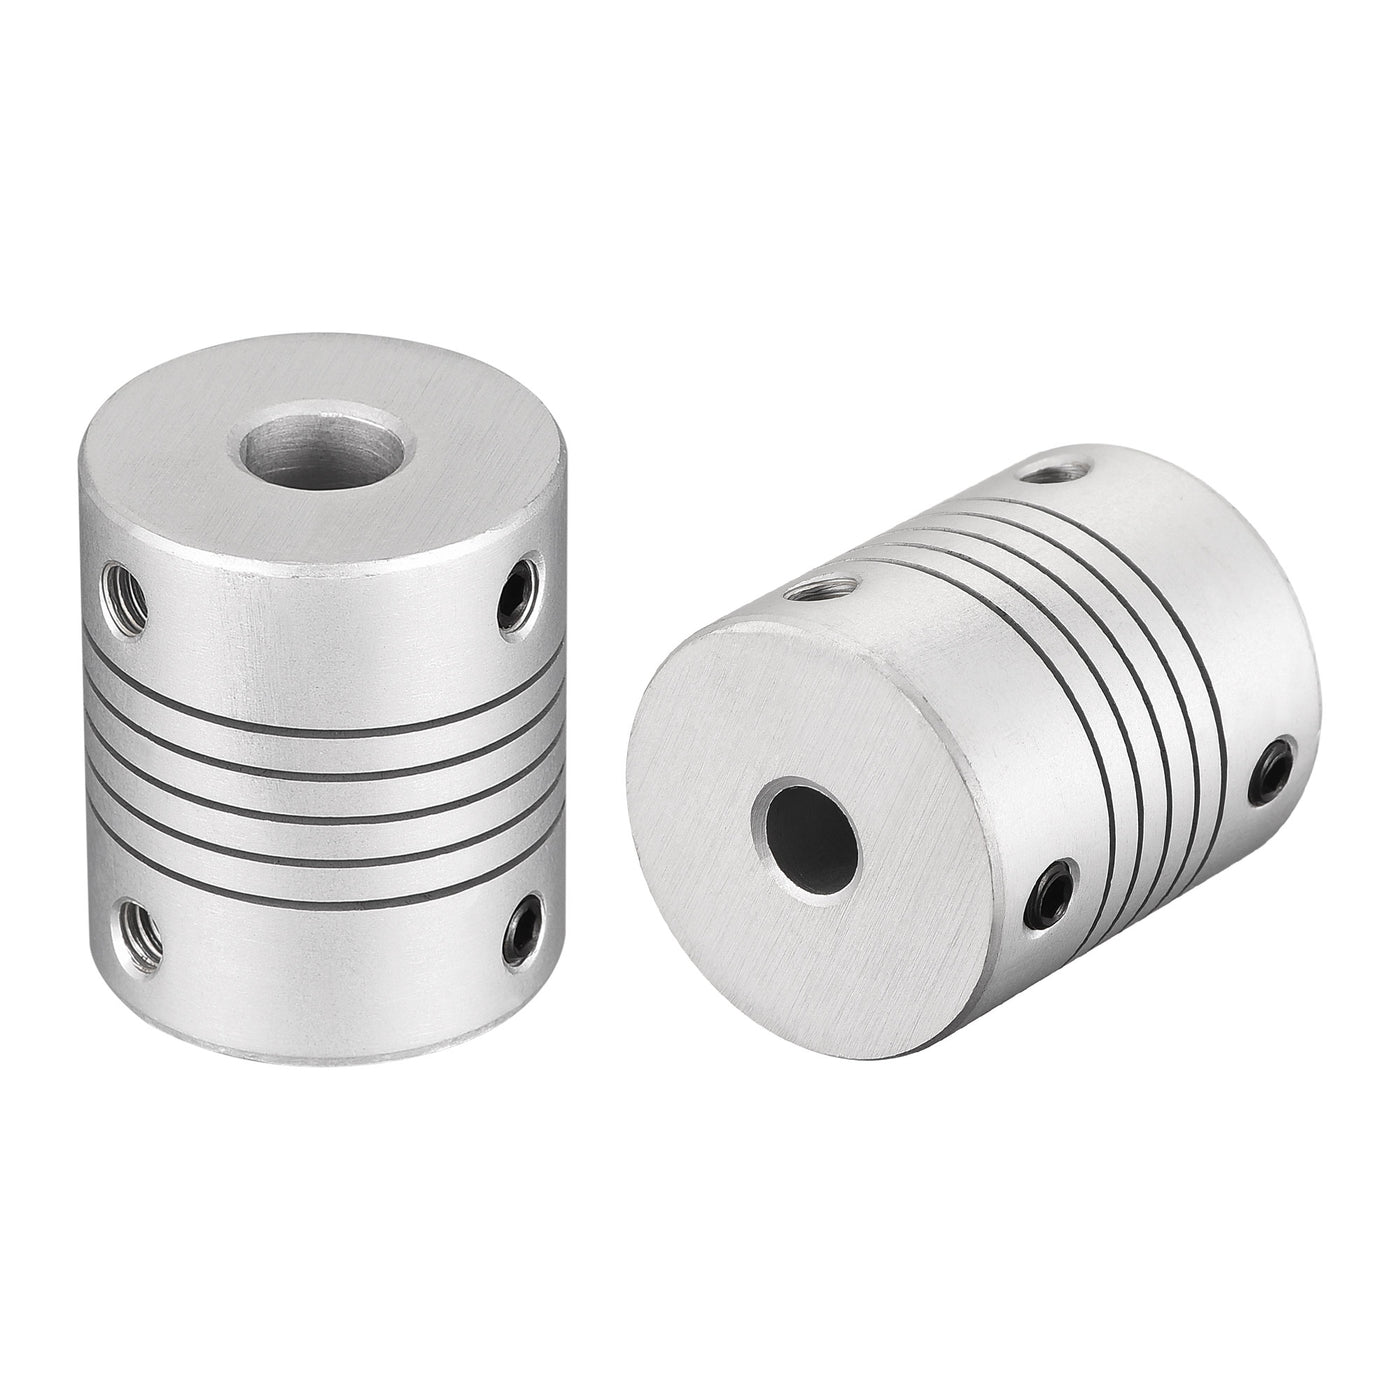 uxcell Uxcell 8mm to 6mm Aluminum Alloy Shaft Coupling Flexible Coupler L30xD25 Silver 2Pcs